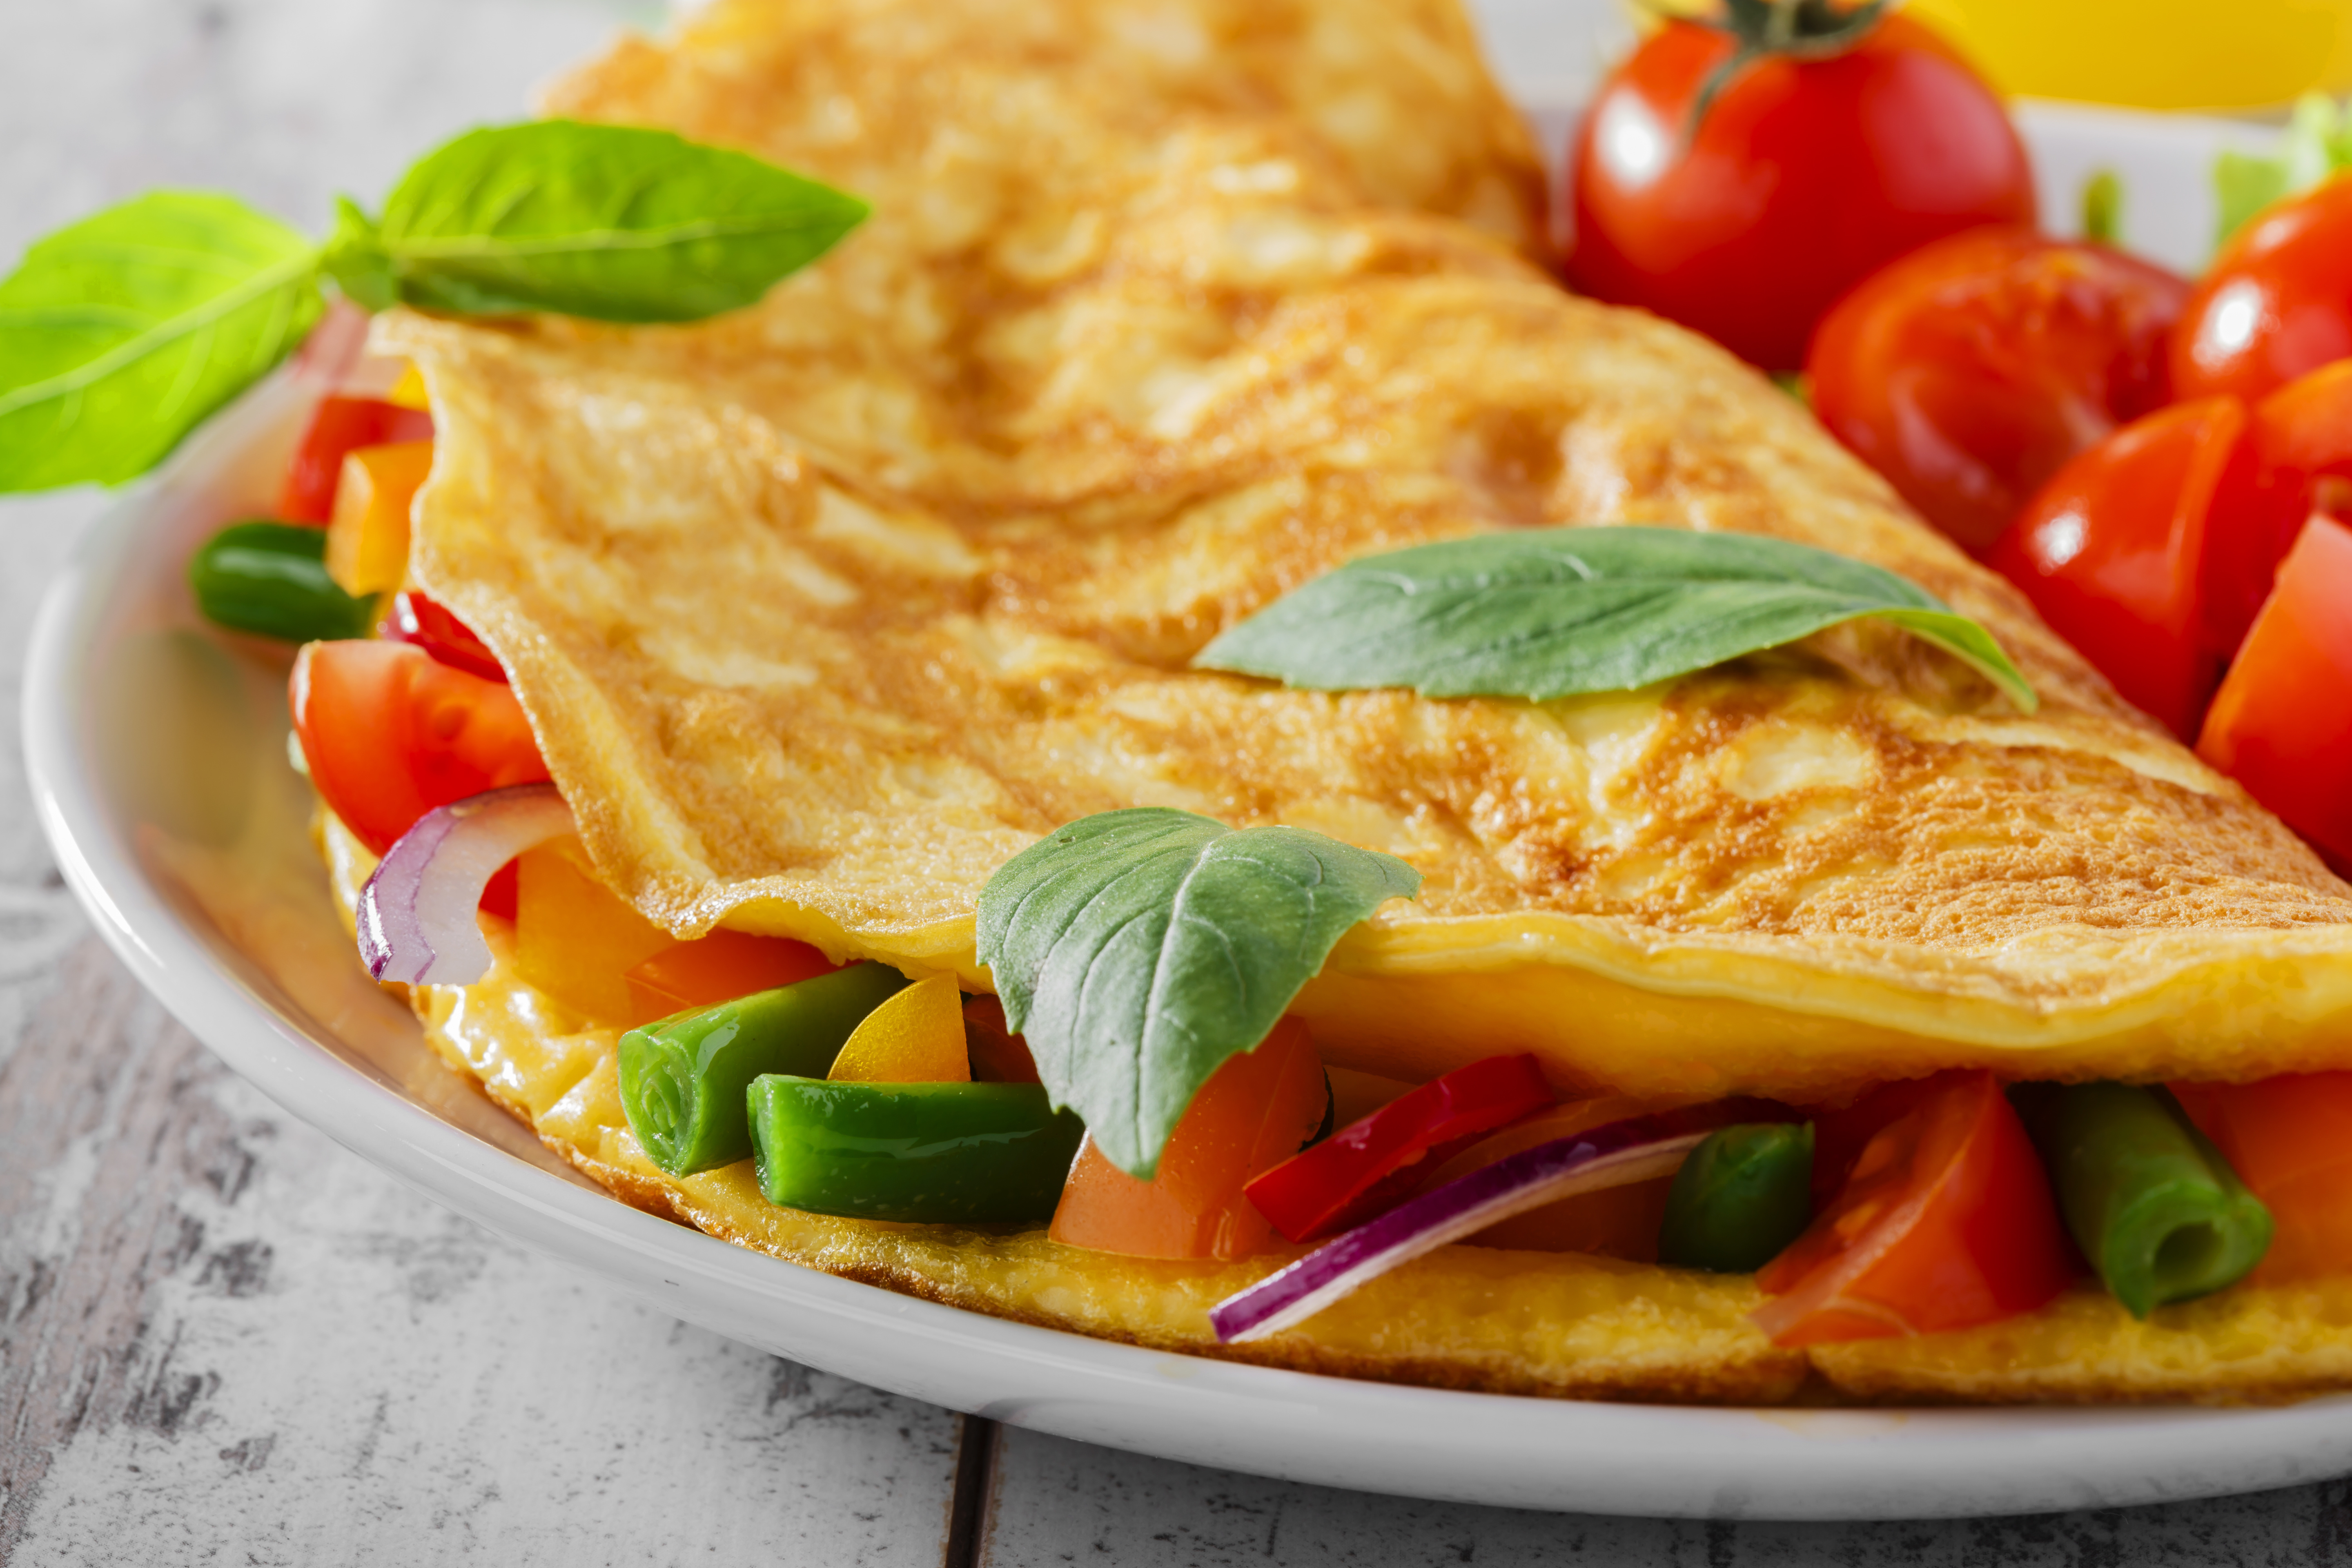 These Omelet Recipes Are Delicious And Healthy | PeopleHype